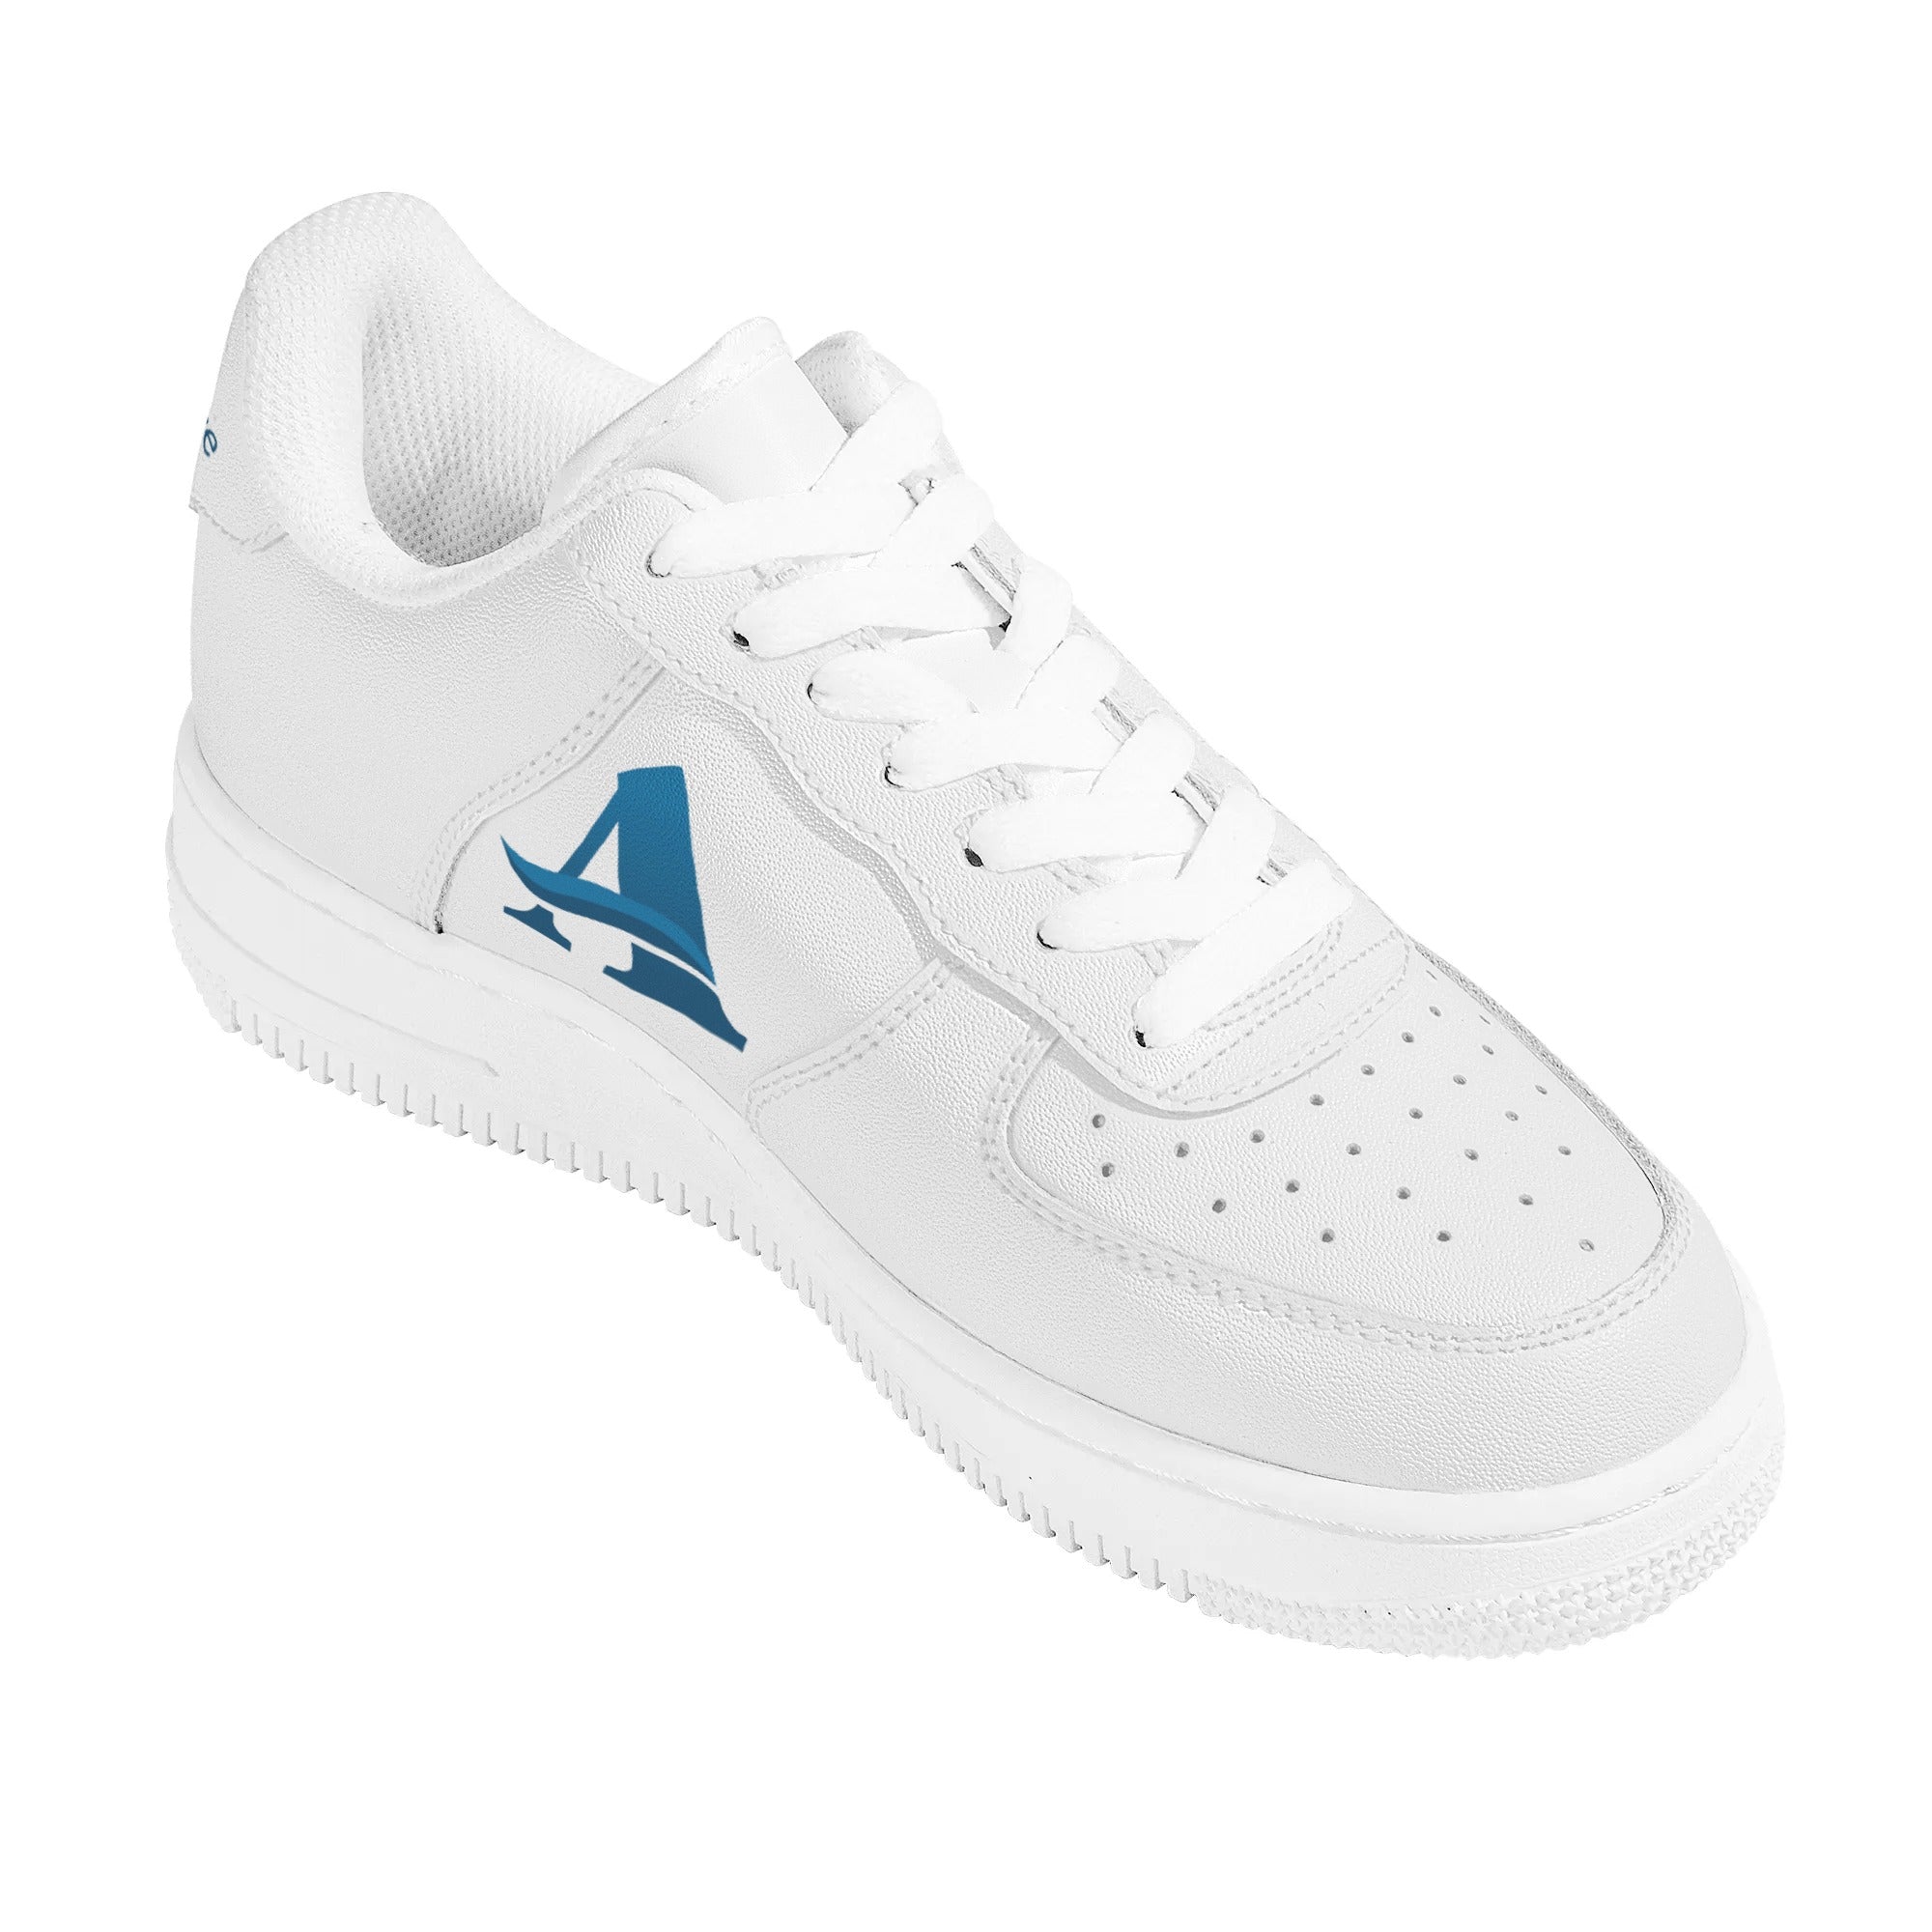 Admiral Insurance | Business Branded Customized Shoes | Shoe Zero